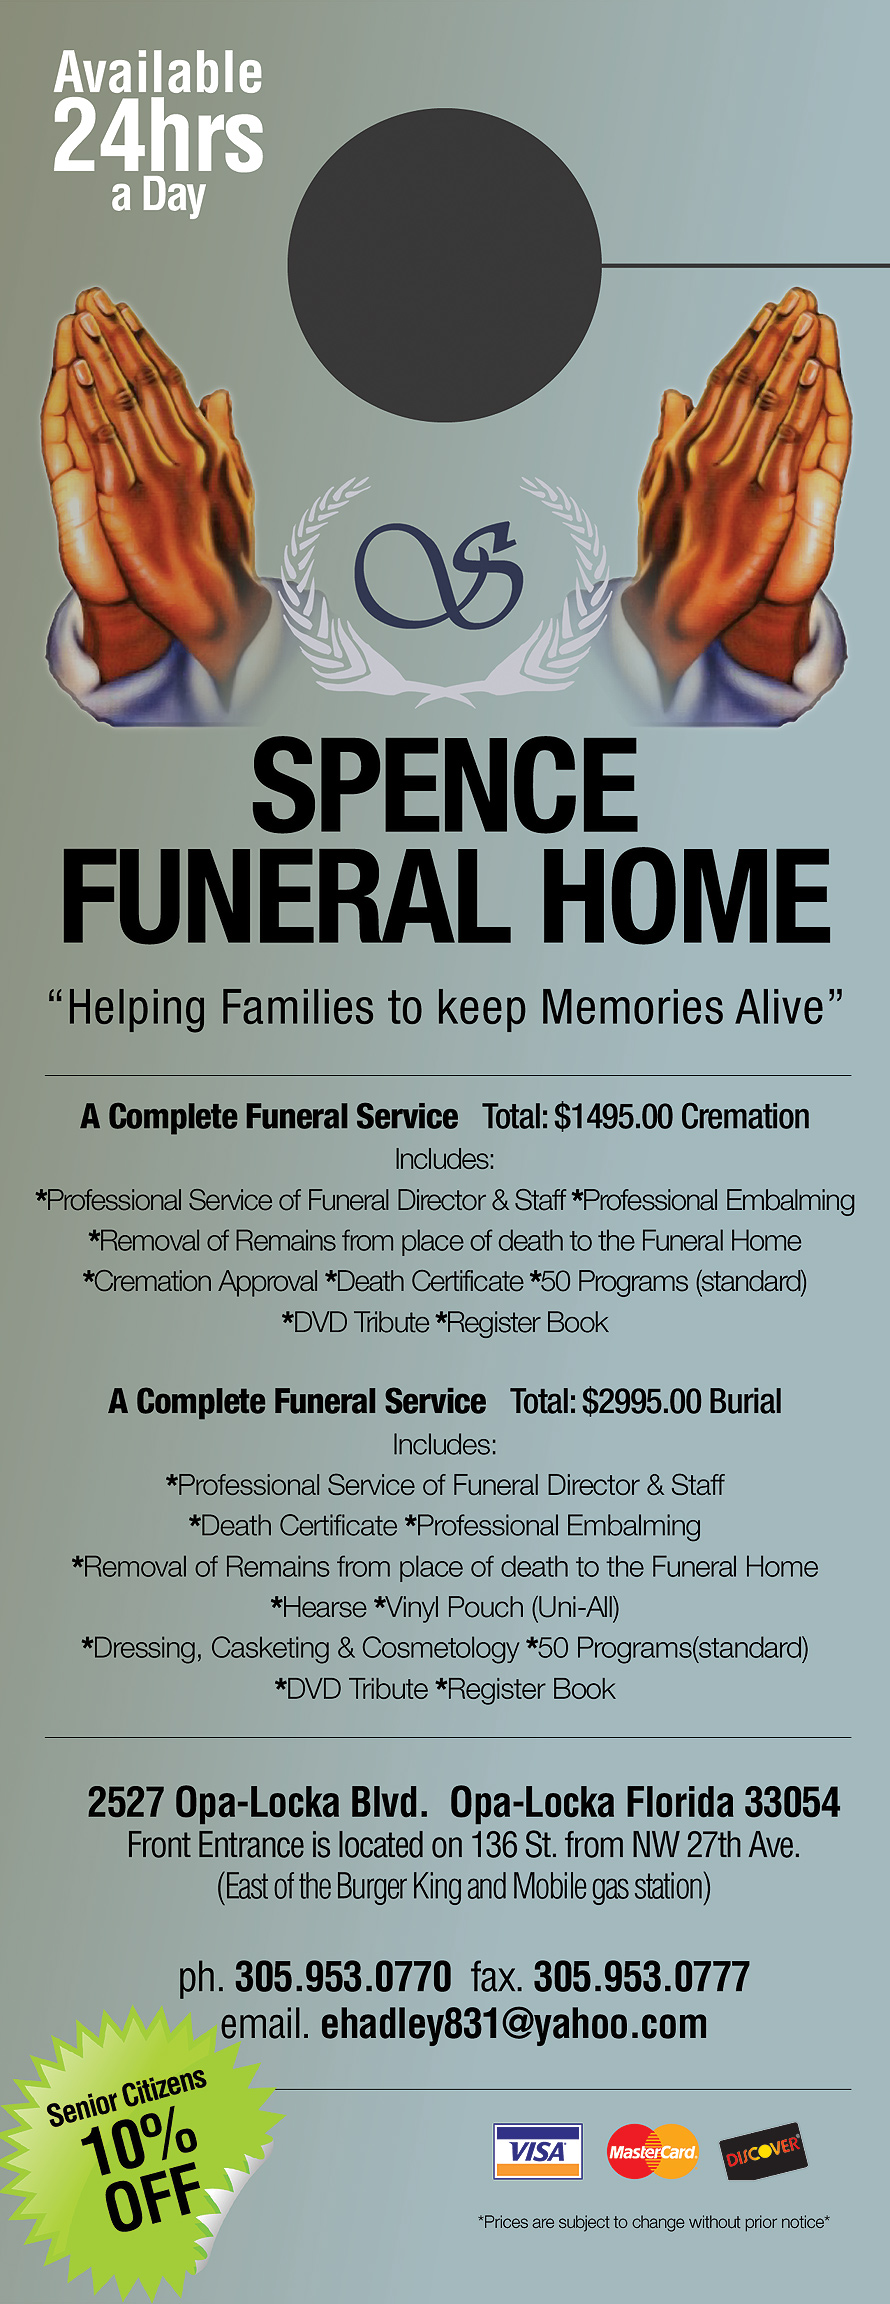 Spence Funeral Home Helping Families 